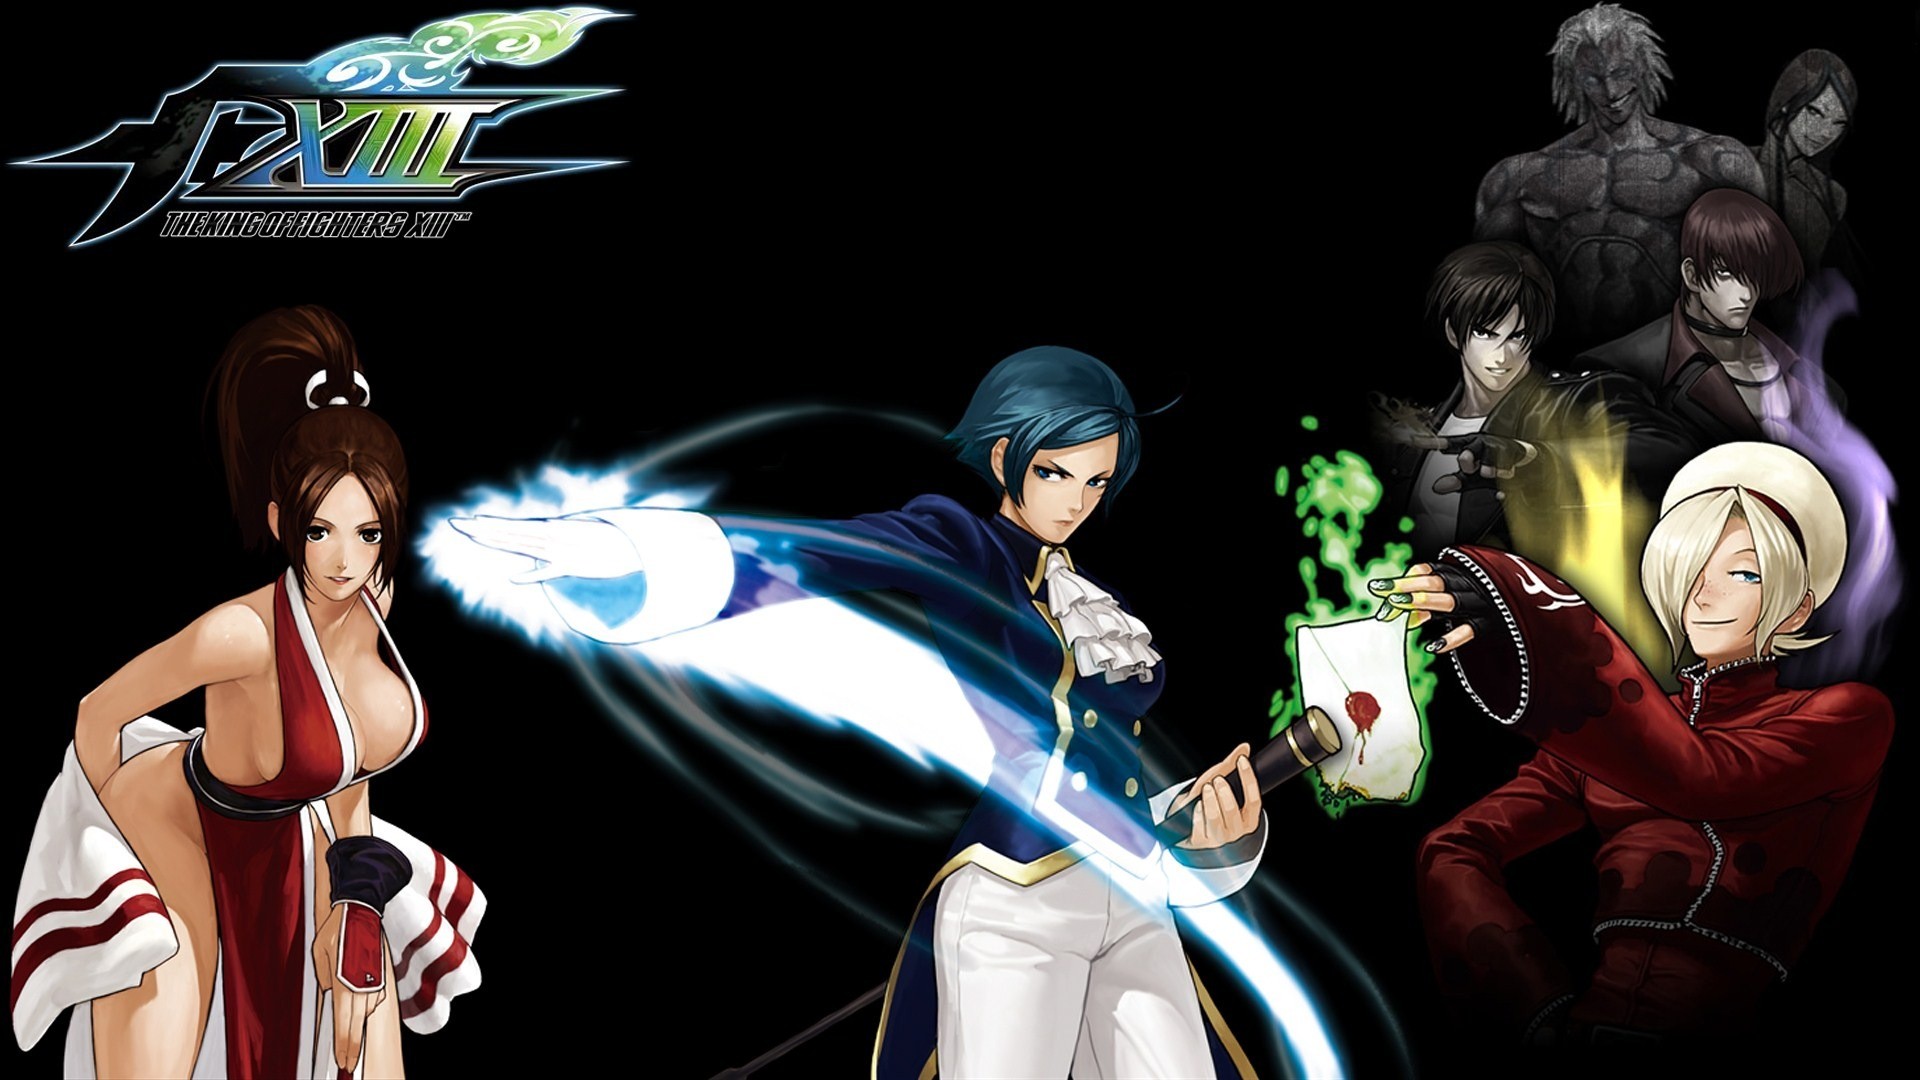 1920x1080 The King of Fighters XIII wallpapers #7 - .